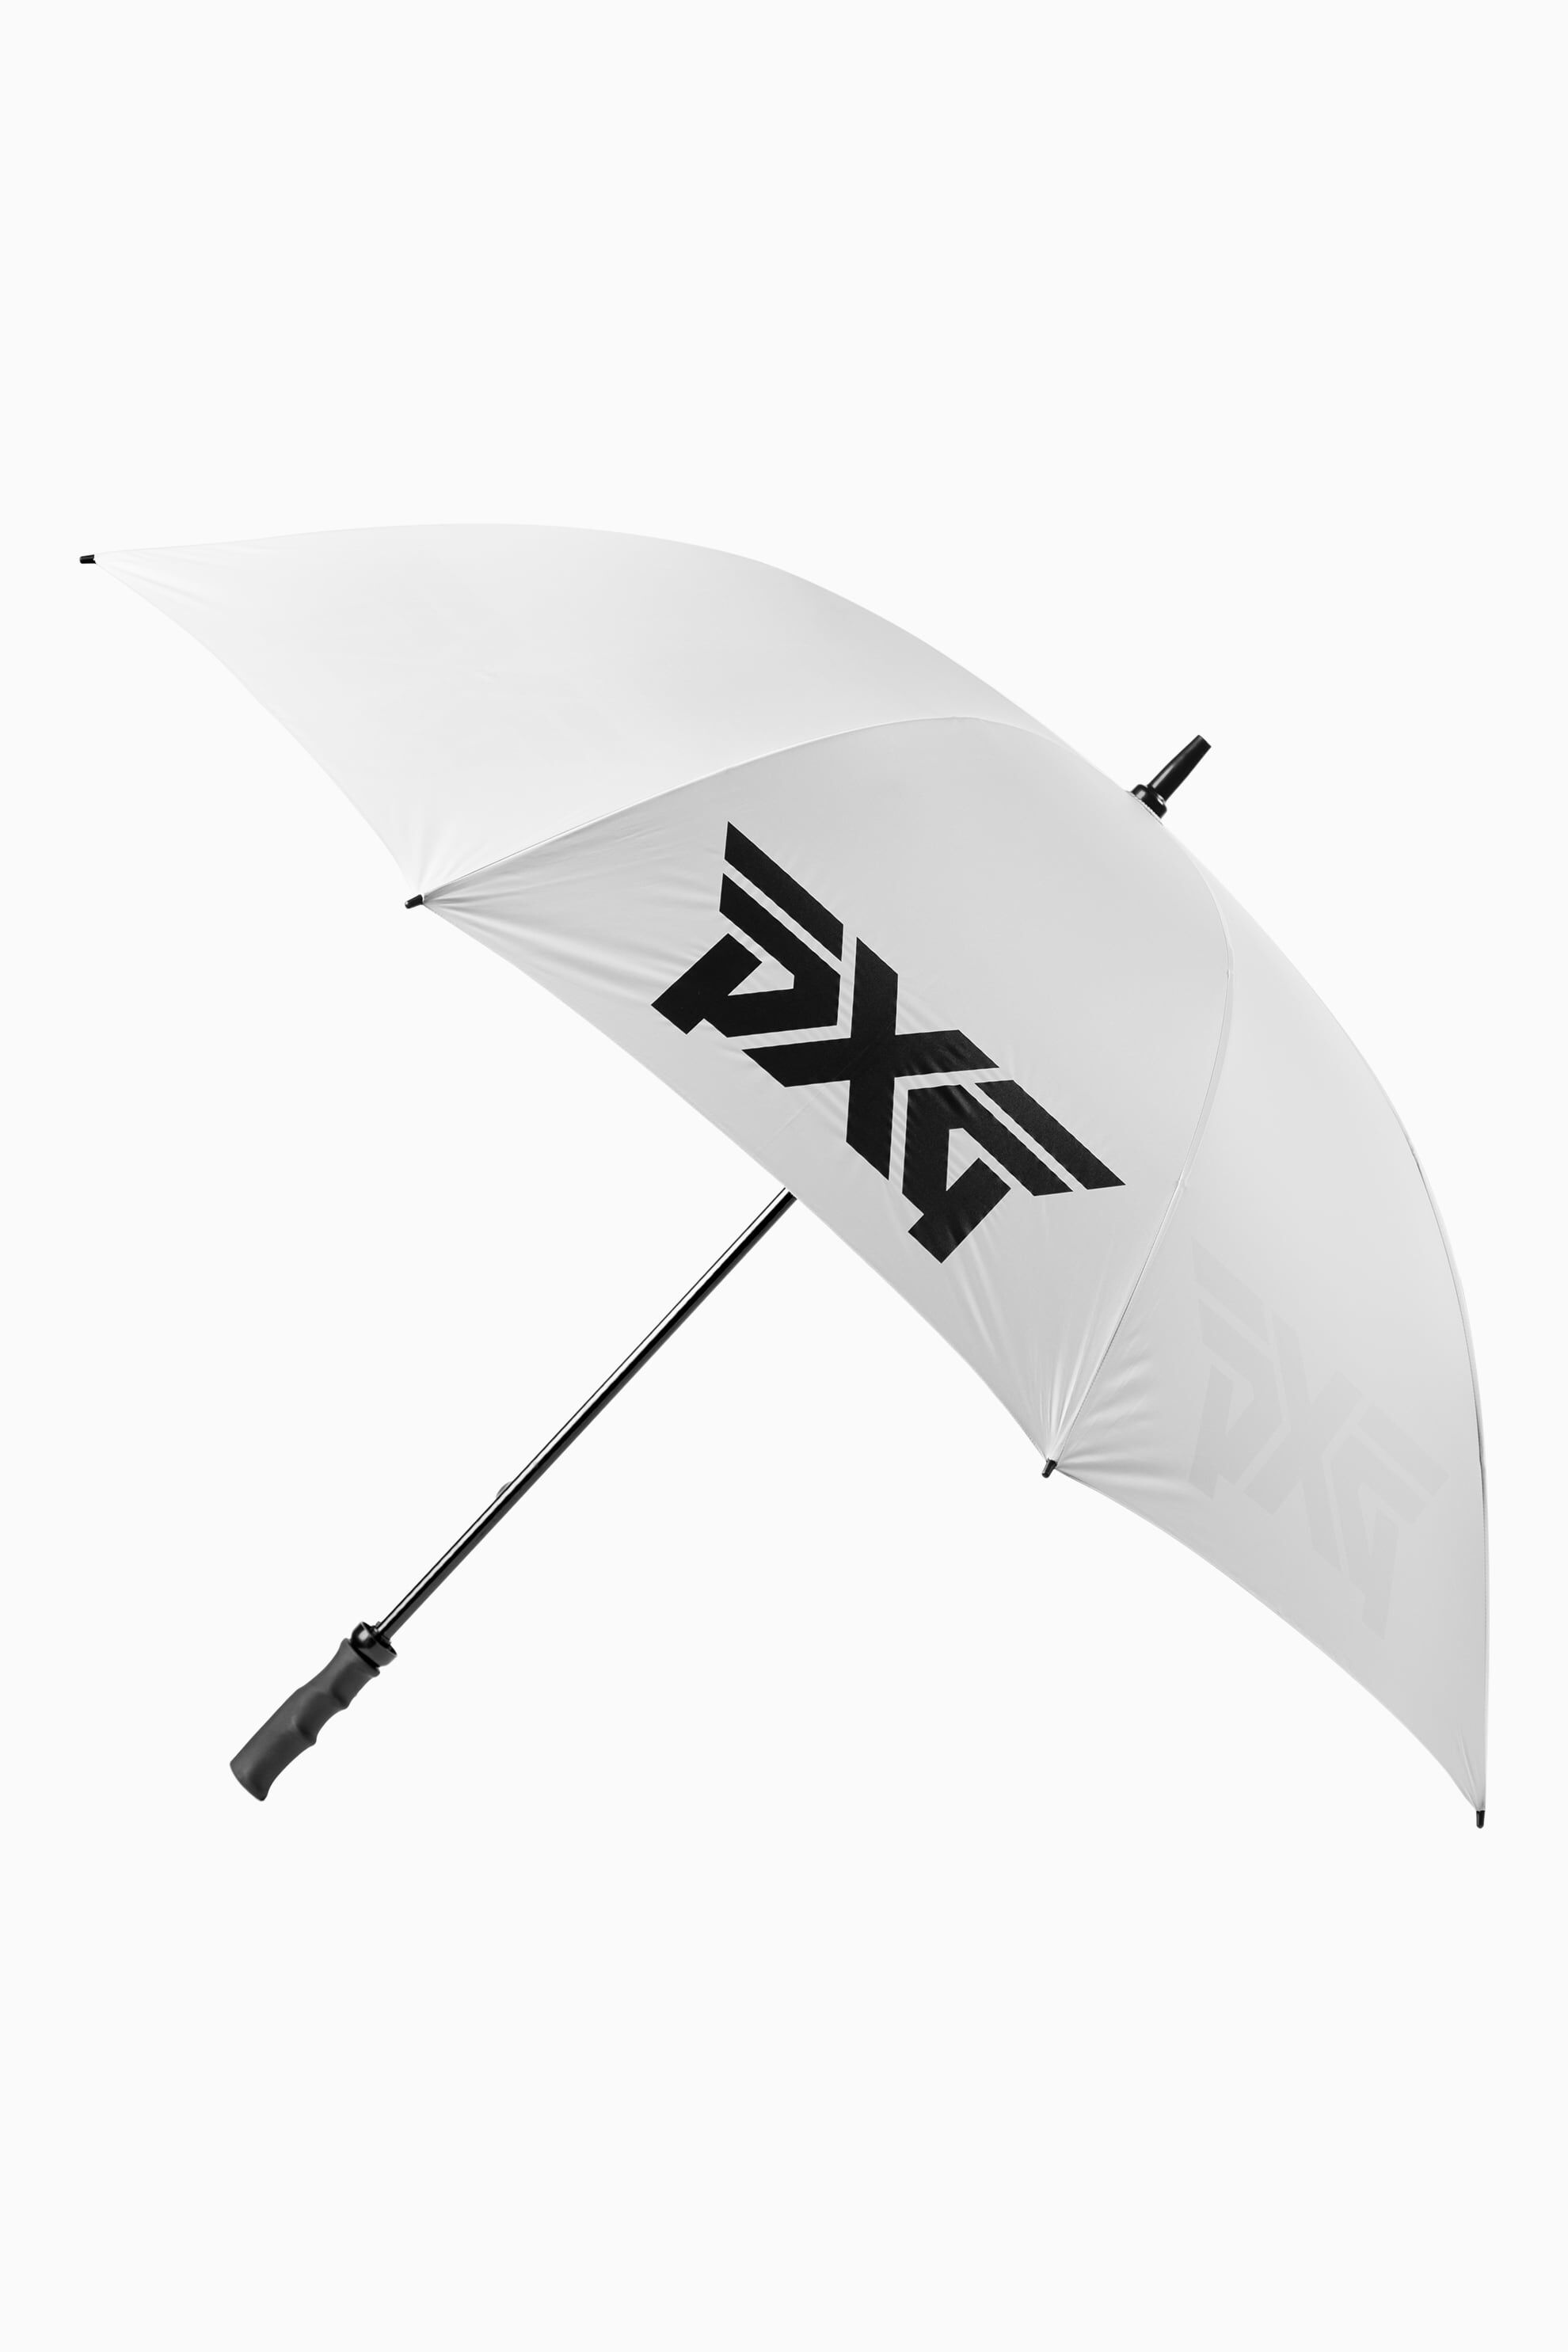 Single Canopy Umbrella Shop the Highest Quality Golf Apparel, Gear, Accessories and Golf Clubs at PXG